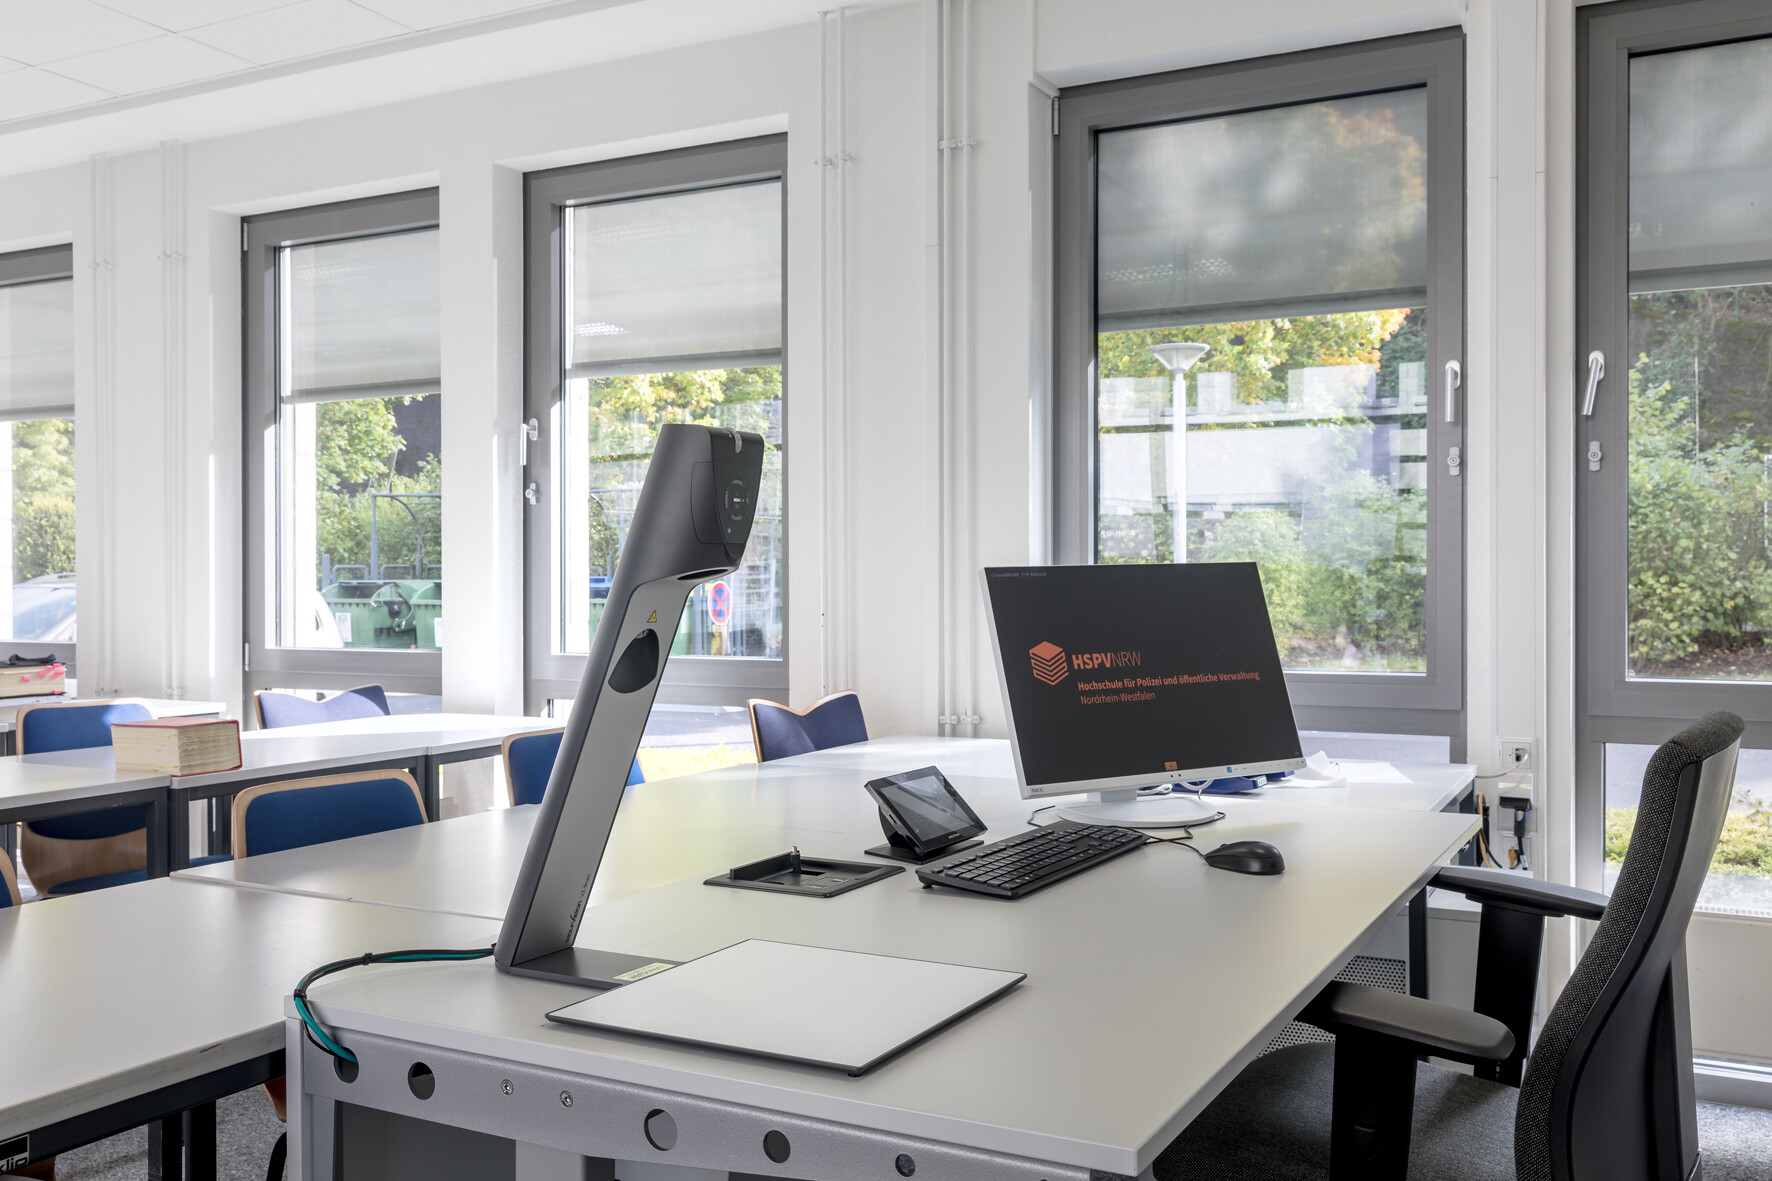 Course room lectern with installed WolfVision VZ-8neo Visualizer system. Photo: Copyright Jörg Küster